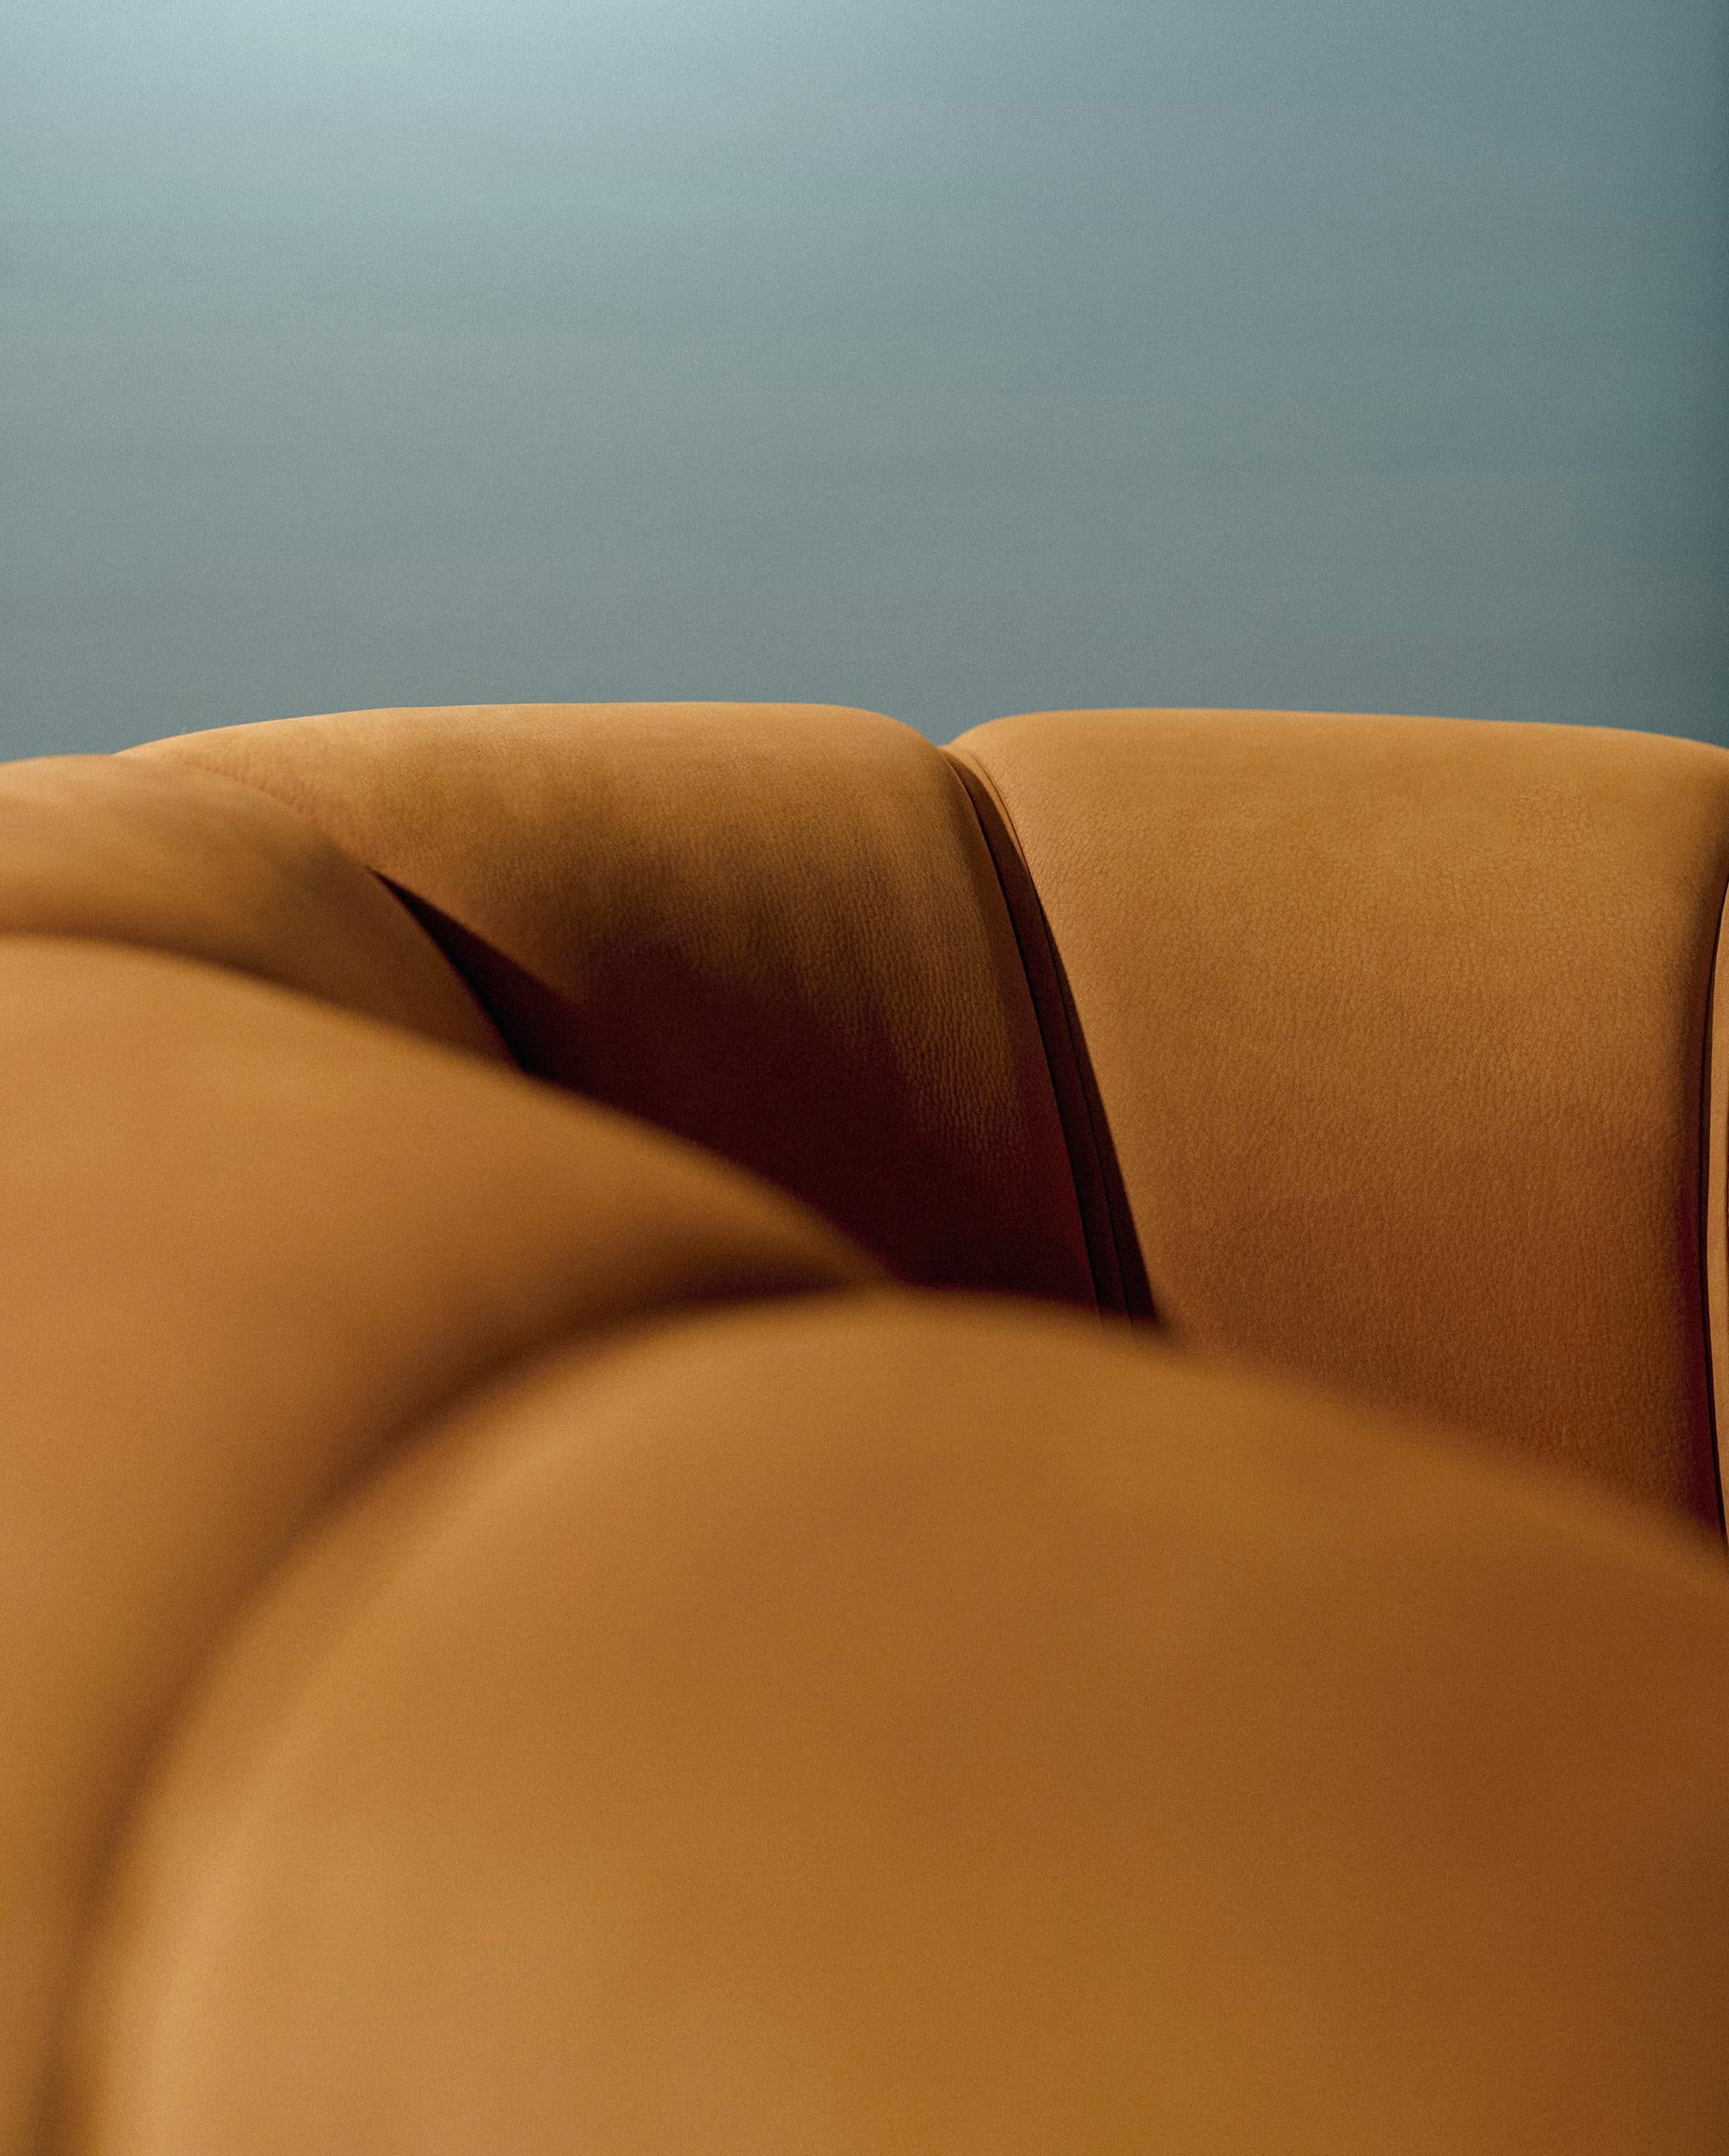 Leather 'Croissant' Lounge Chair by Illum Wikkelsø for Gubi For Sale 3